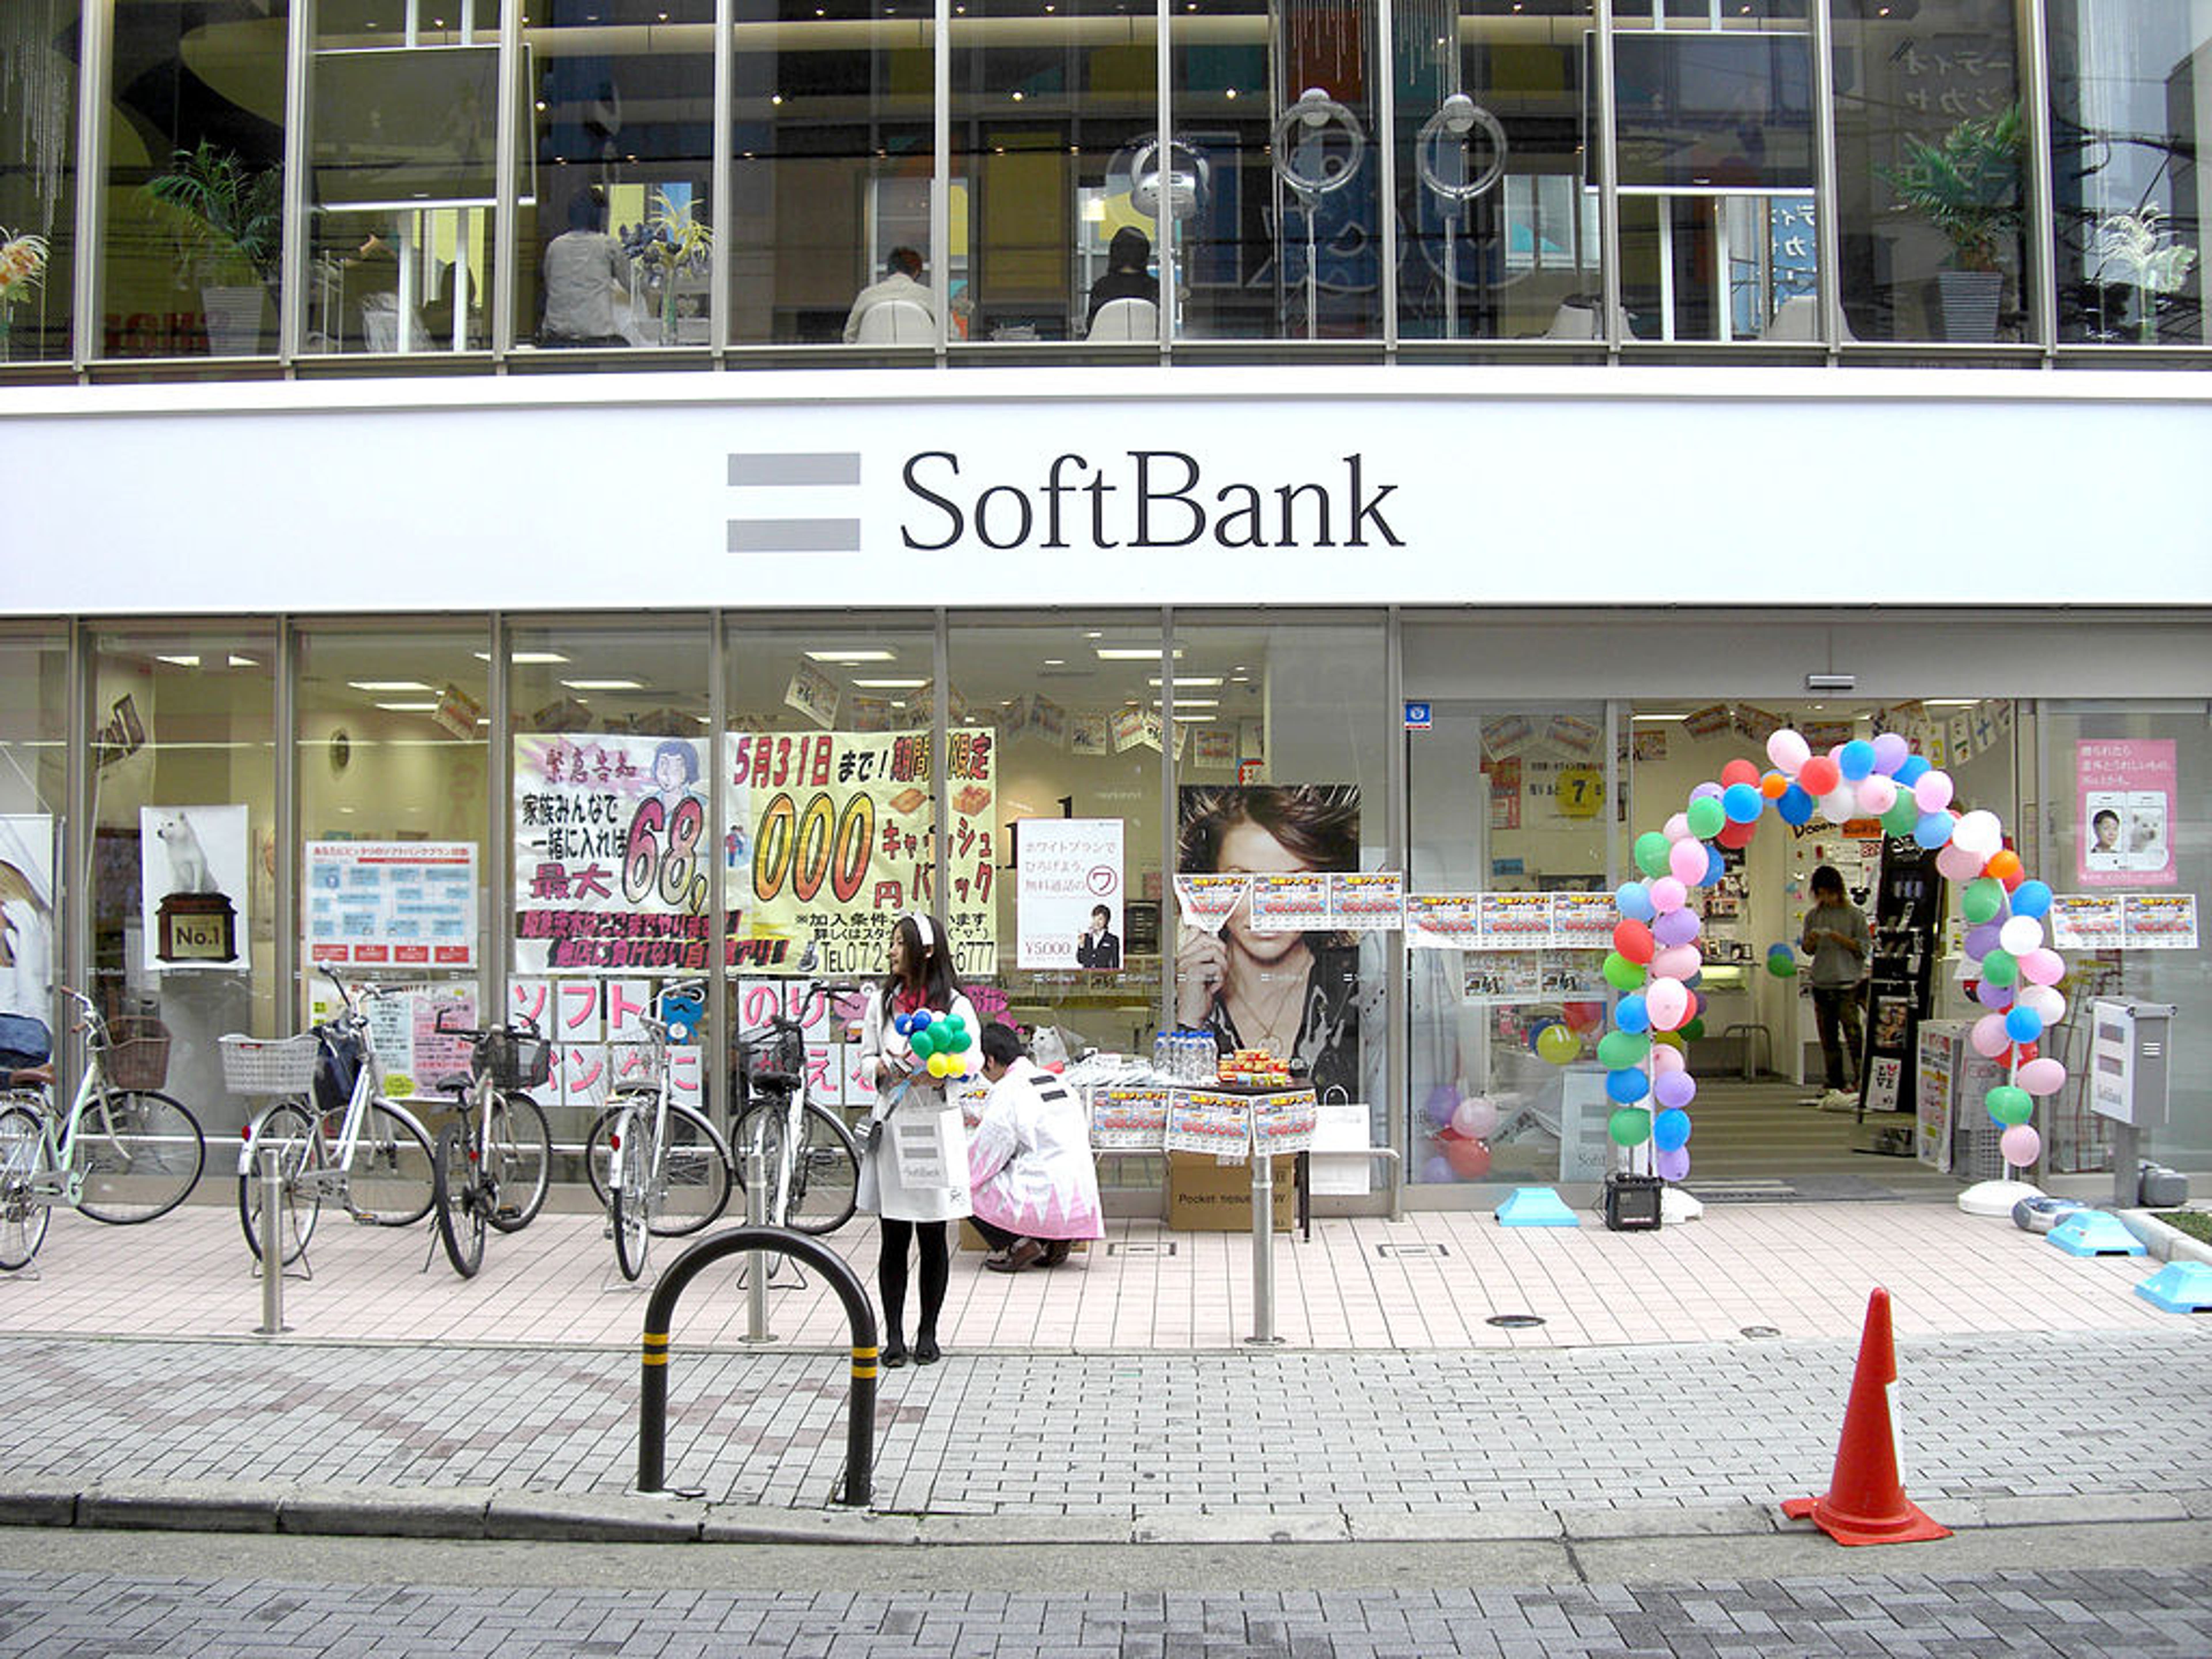 Could SoftBank Go Private Following Disappointing Quarterly Results? Analysts See Possibility